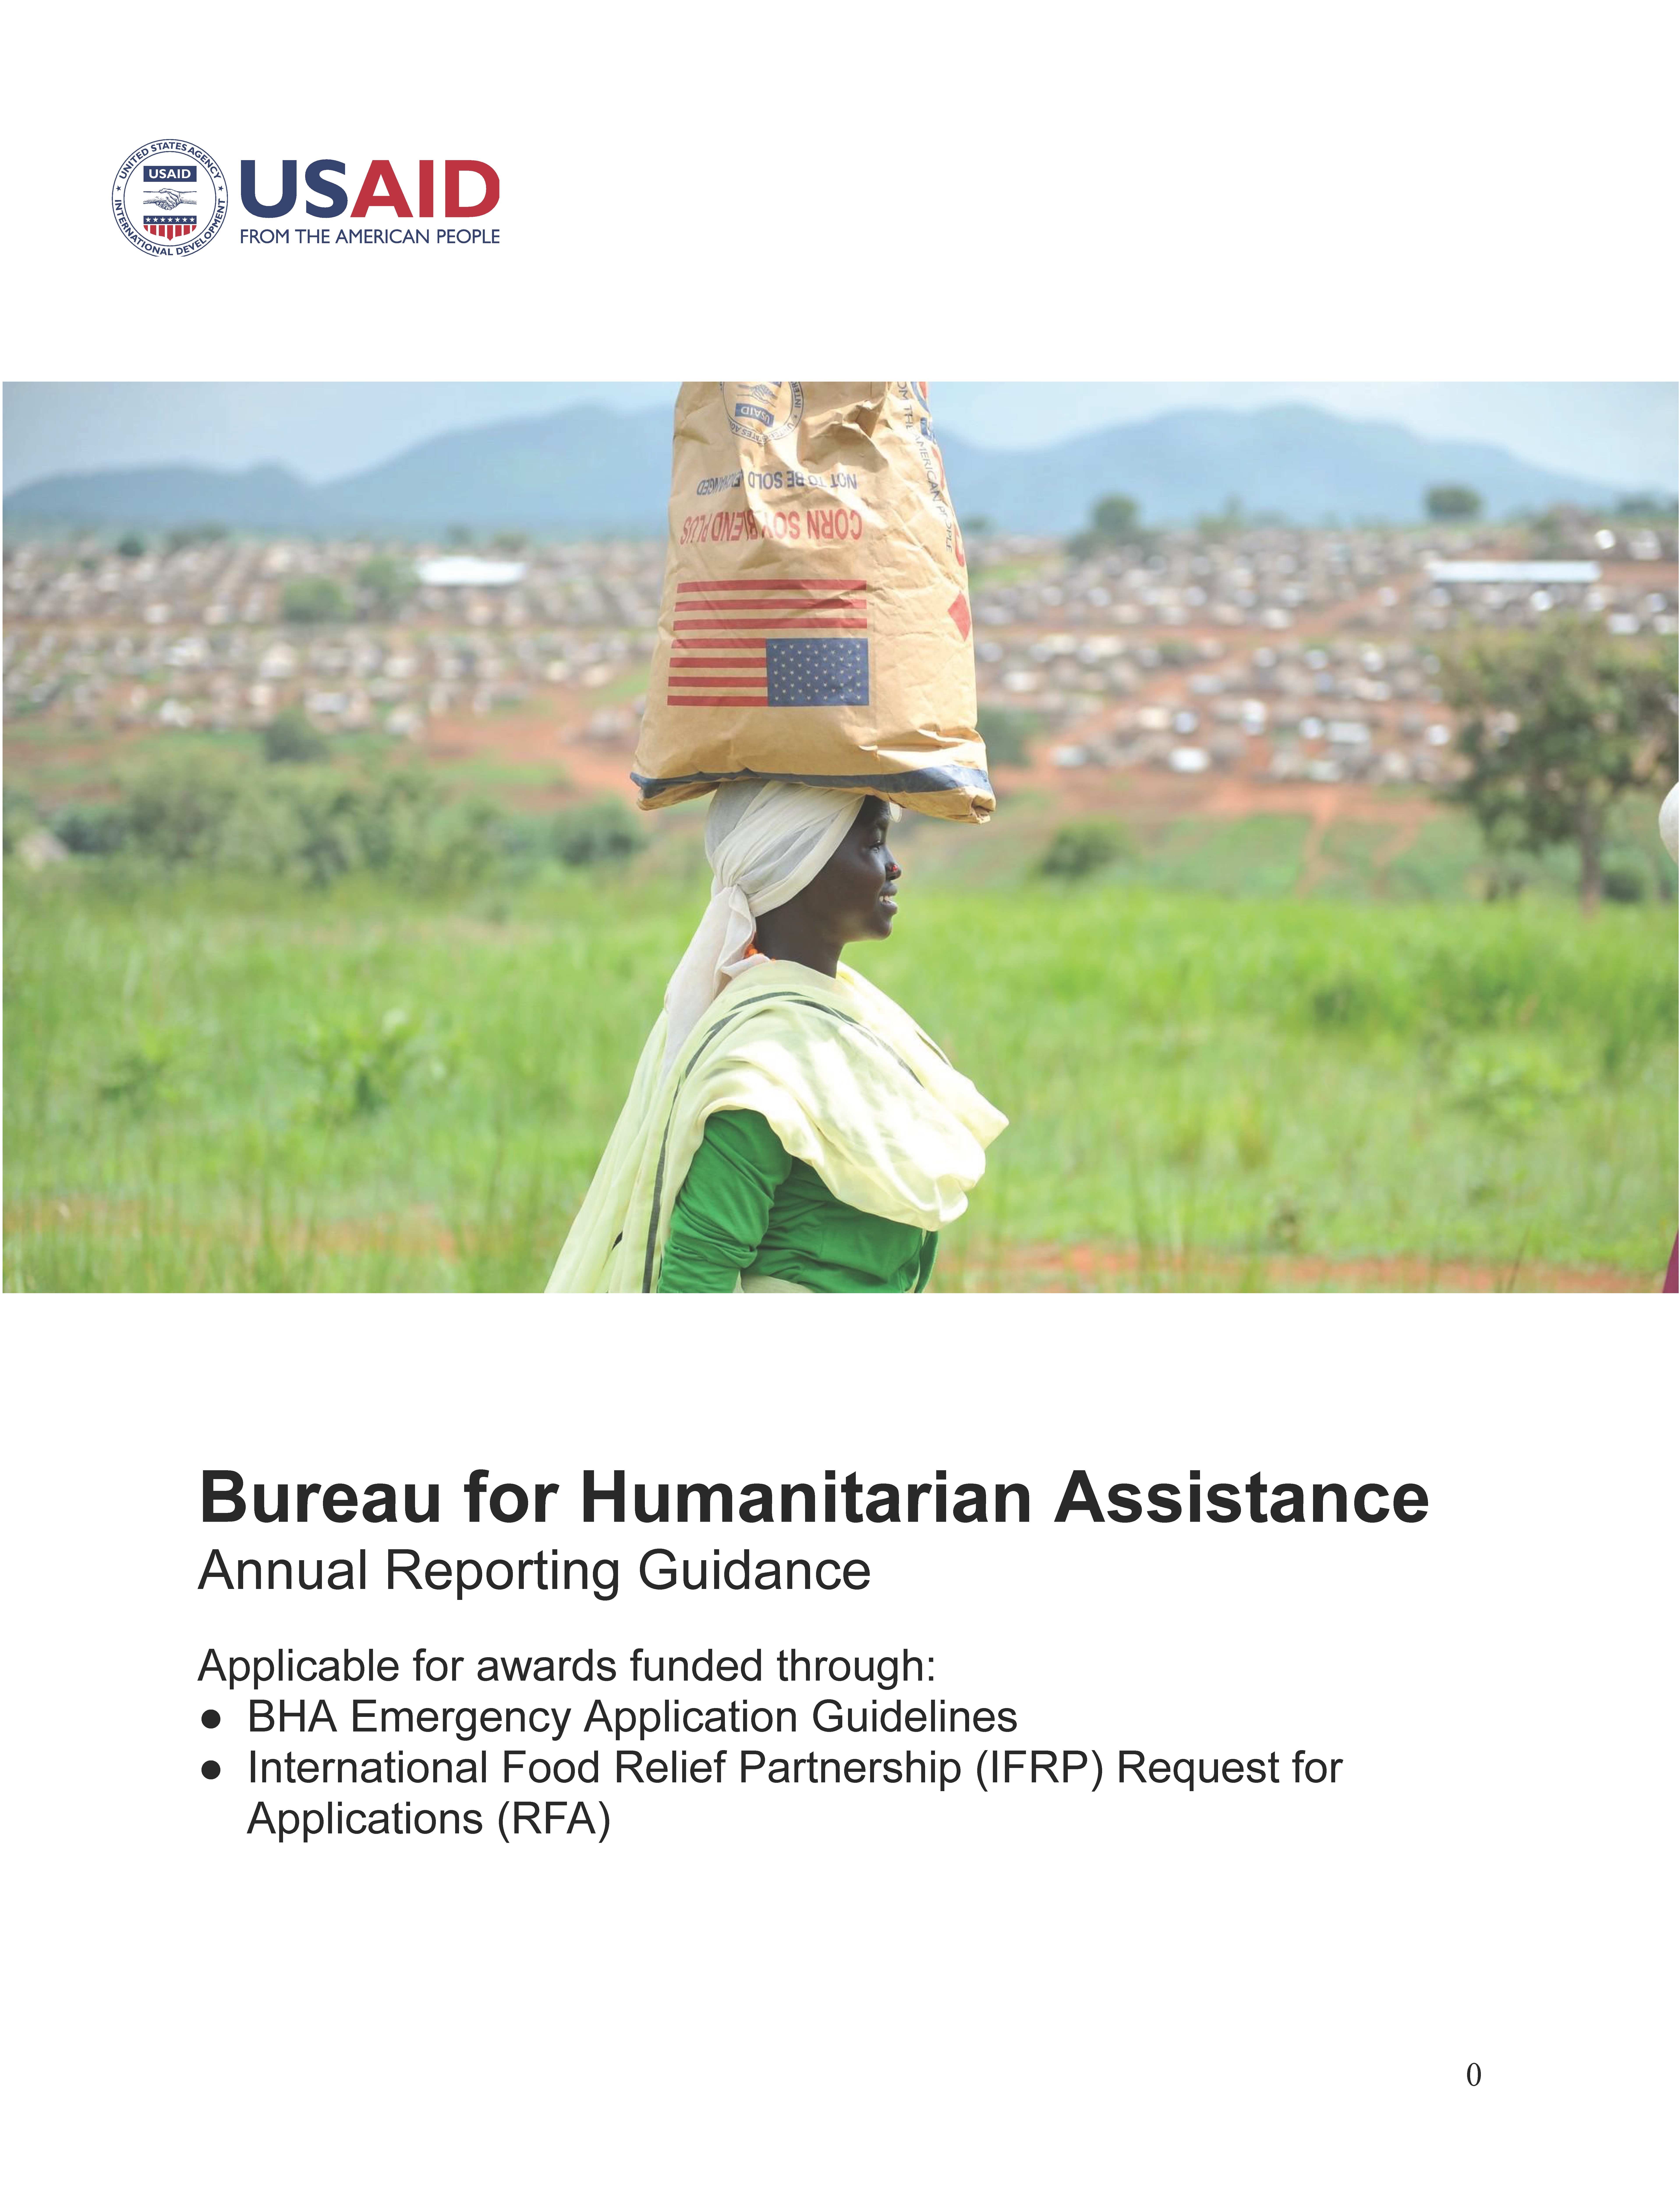 Cover page for Bureau for Humanitarian Assistance FY23 Emergency Annual Reporting Guidance